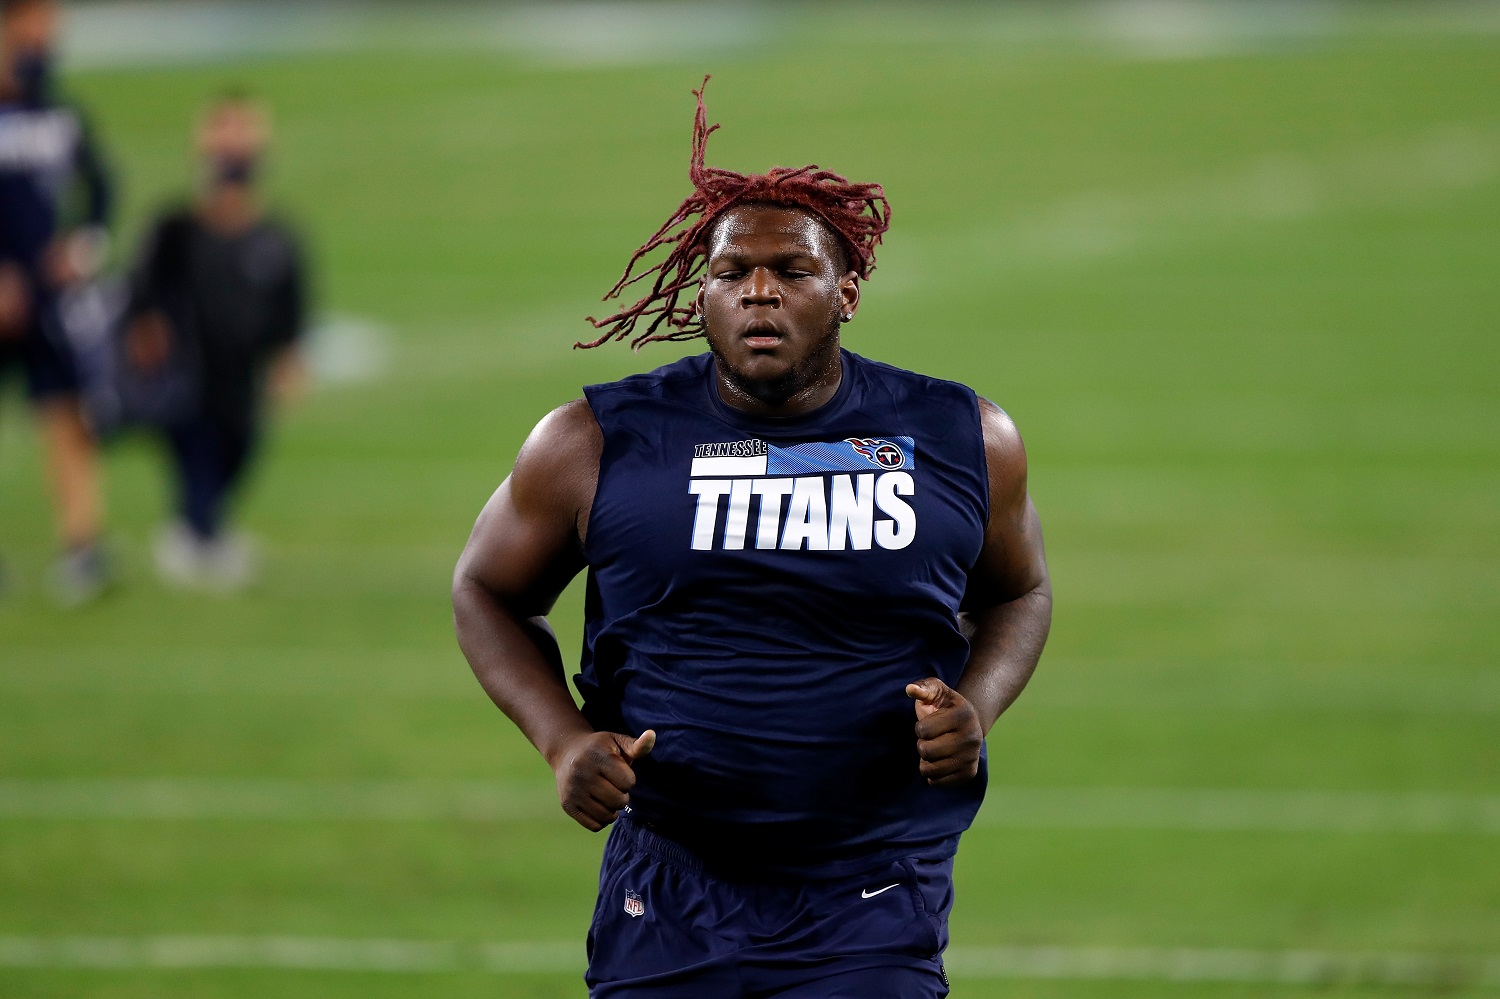 2020 NFL Draft bust Isaiah Wilson Wants out of the Tennessee Titans